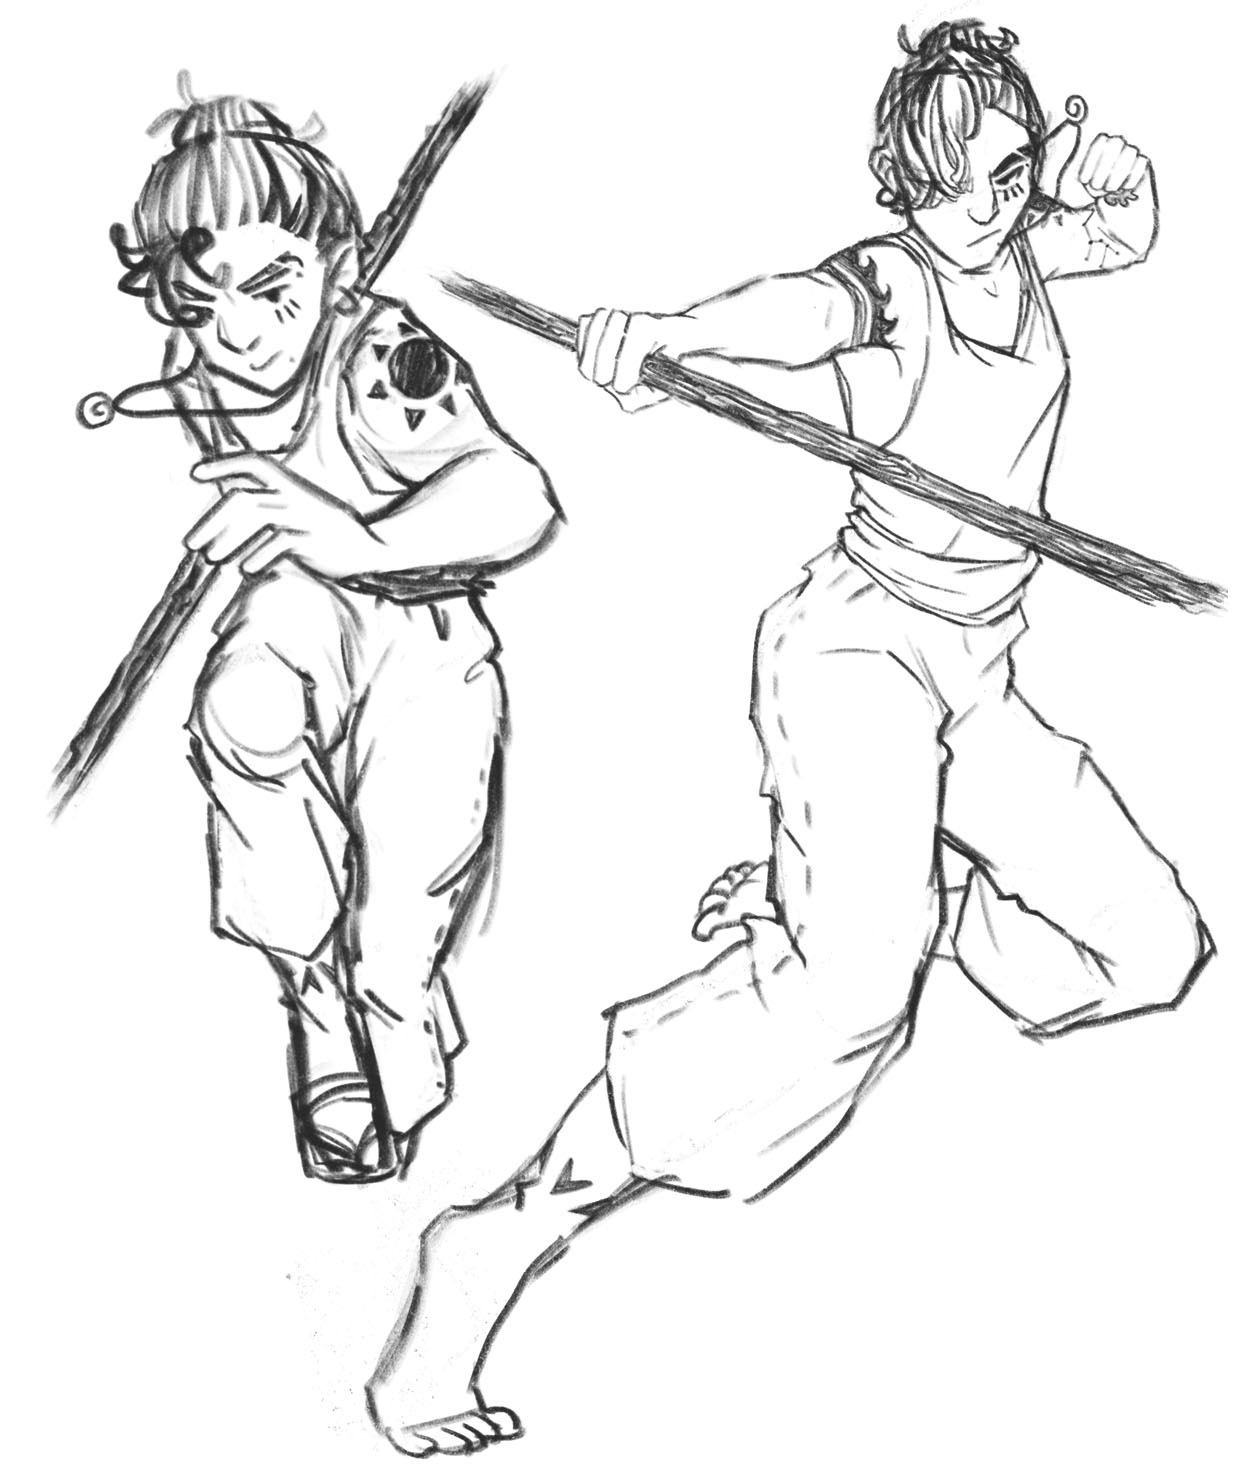 A black and white illustration of a character in two poses within combat from a front view angle, by Indi B. The character holds a weapon and launches towards the audience.